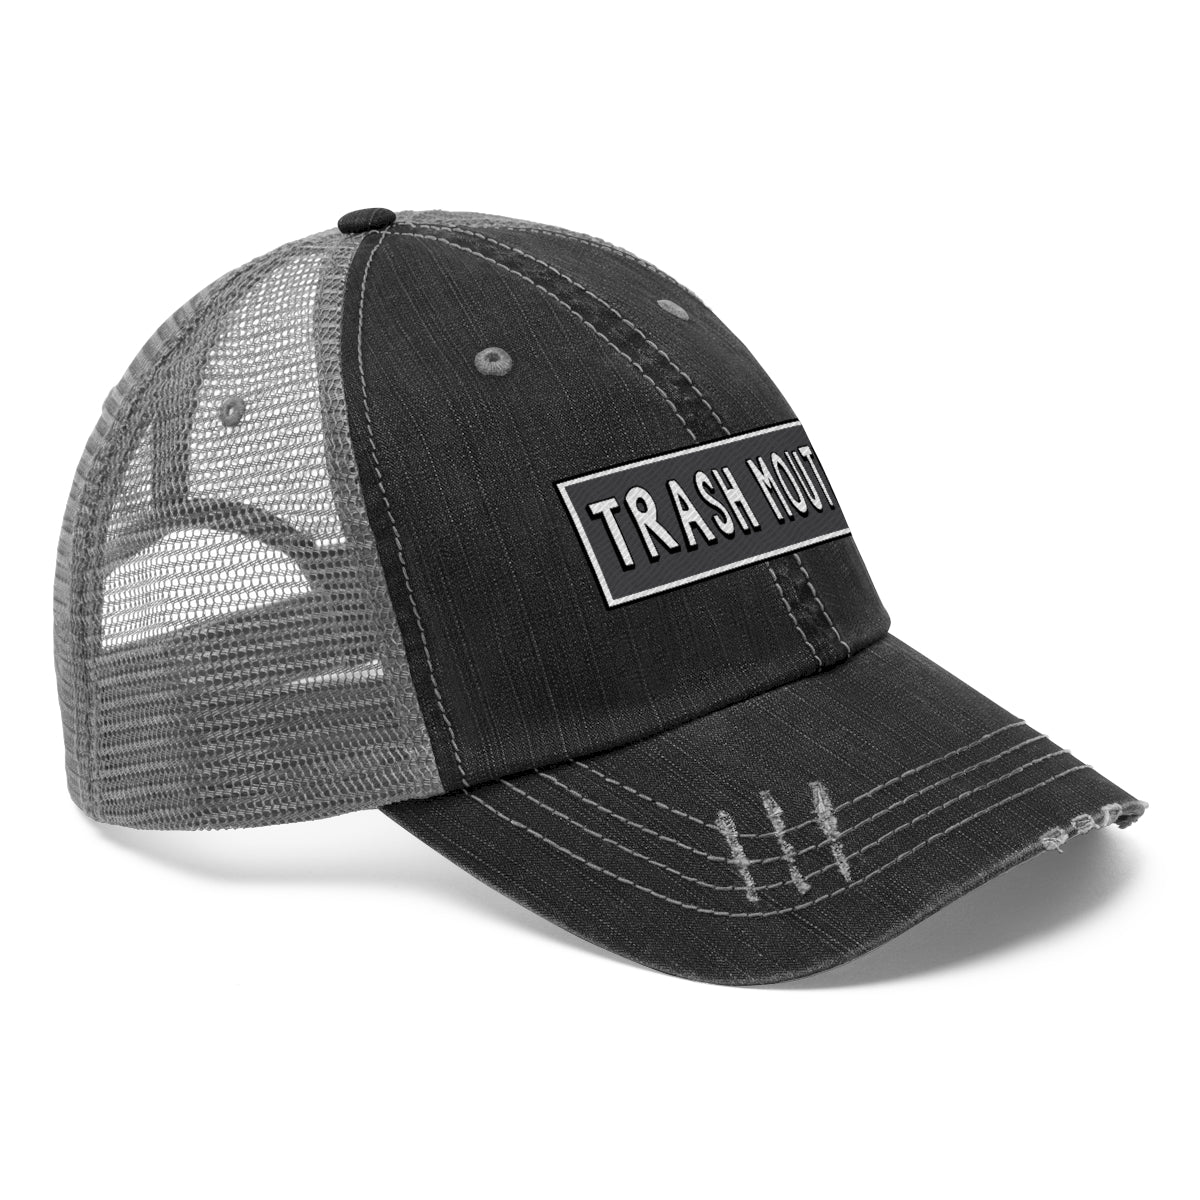 Trash Mouth Embroidered Trucker Hat - Just Like Bob Bob's Burgers